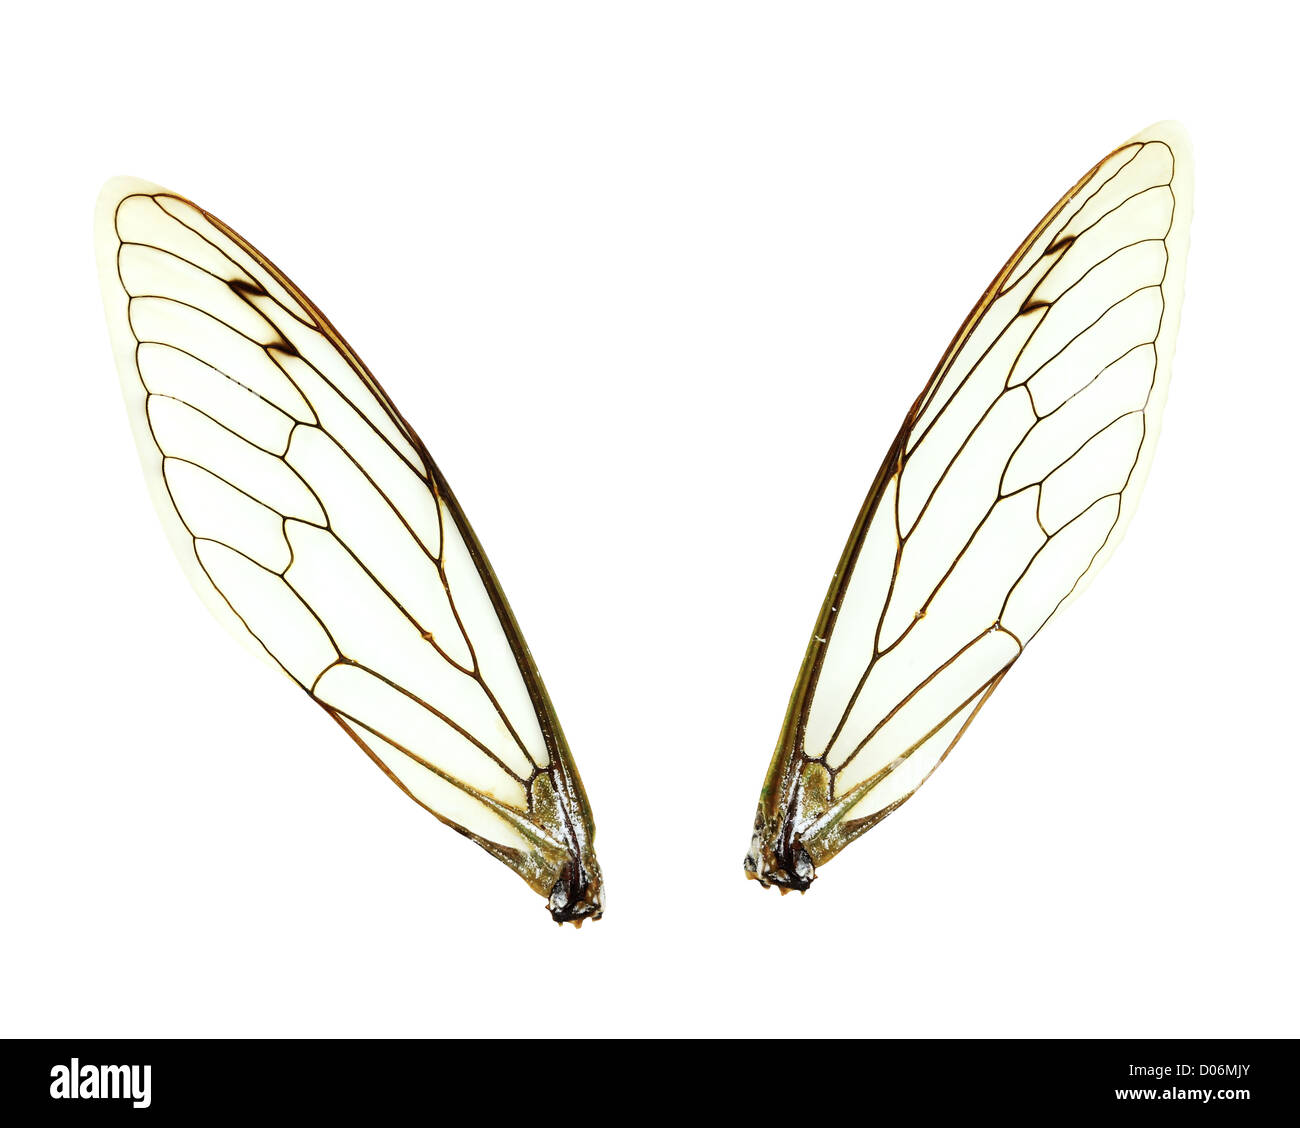 Deux Cigale (JAR) FLy wings isolated over a white background with clipping path inclus. Banque D'Images